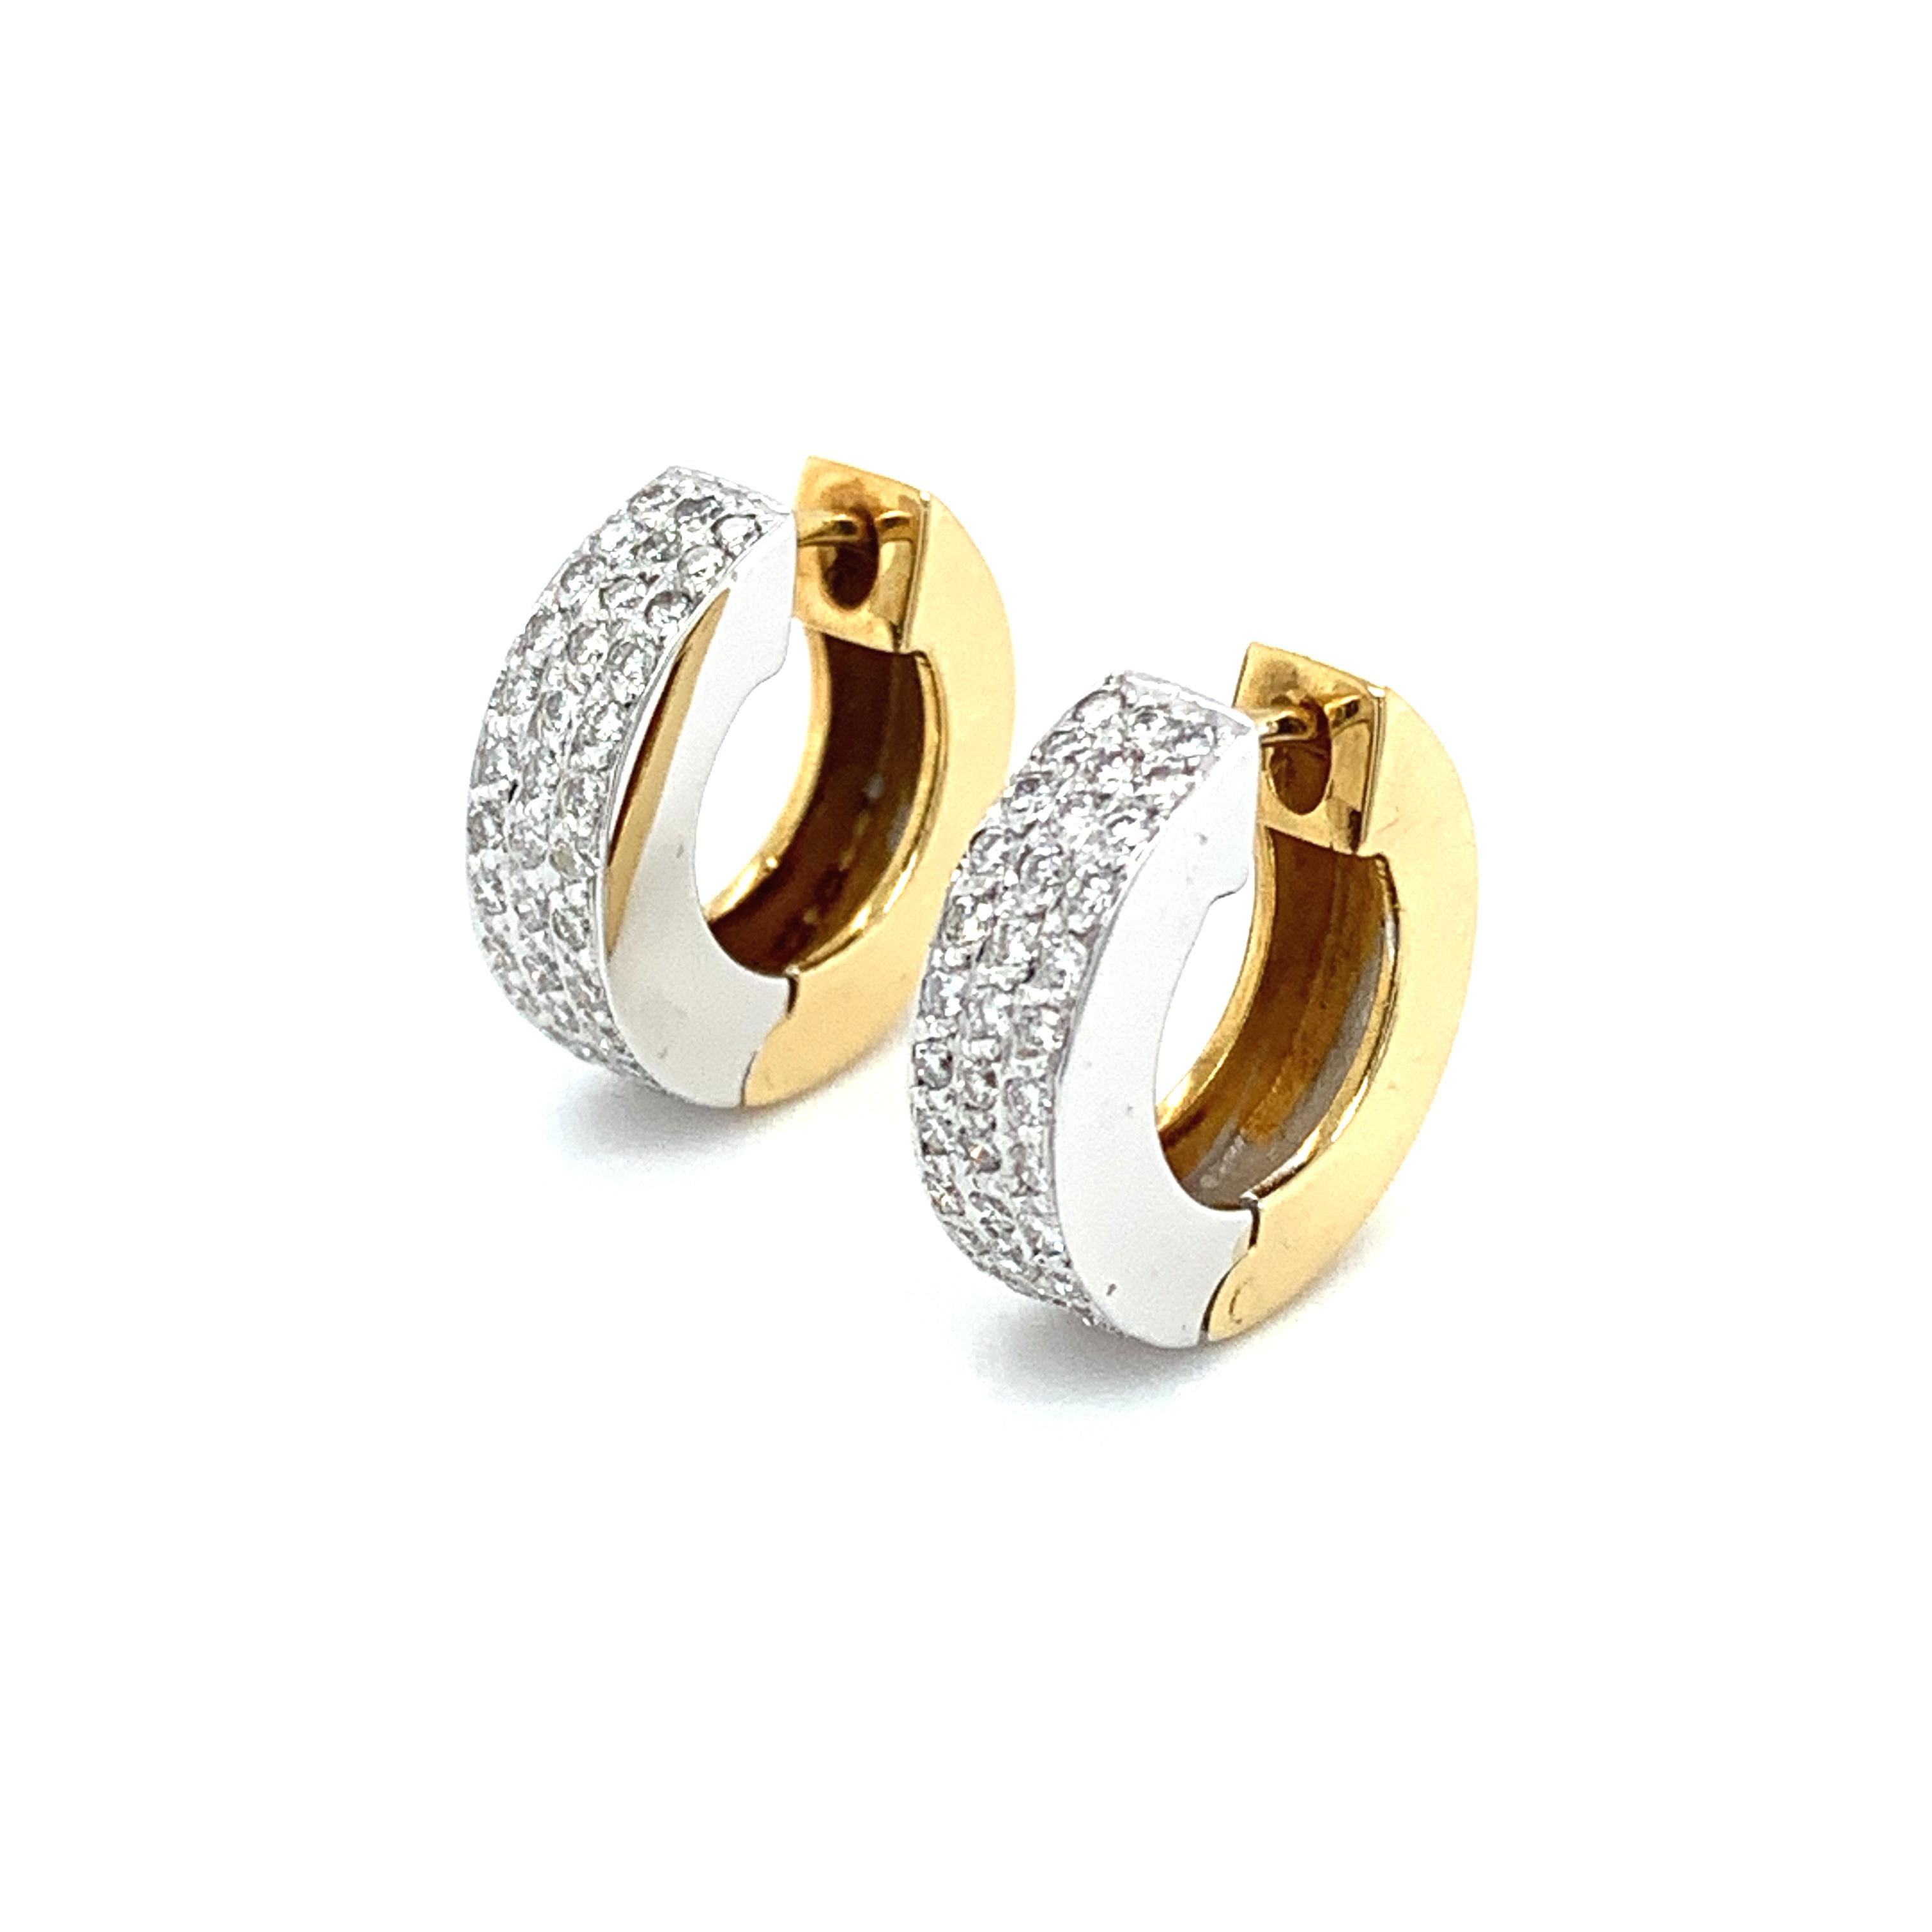 Diamond pave hoops huggies clip earrings 18k yellow and white gold In New Condition For Sale In London, GB